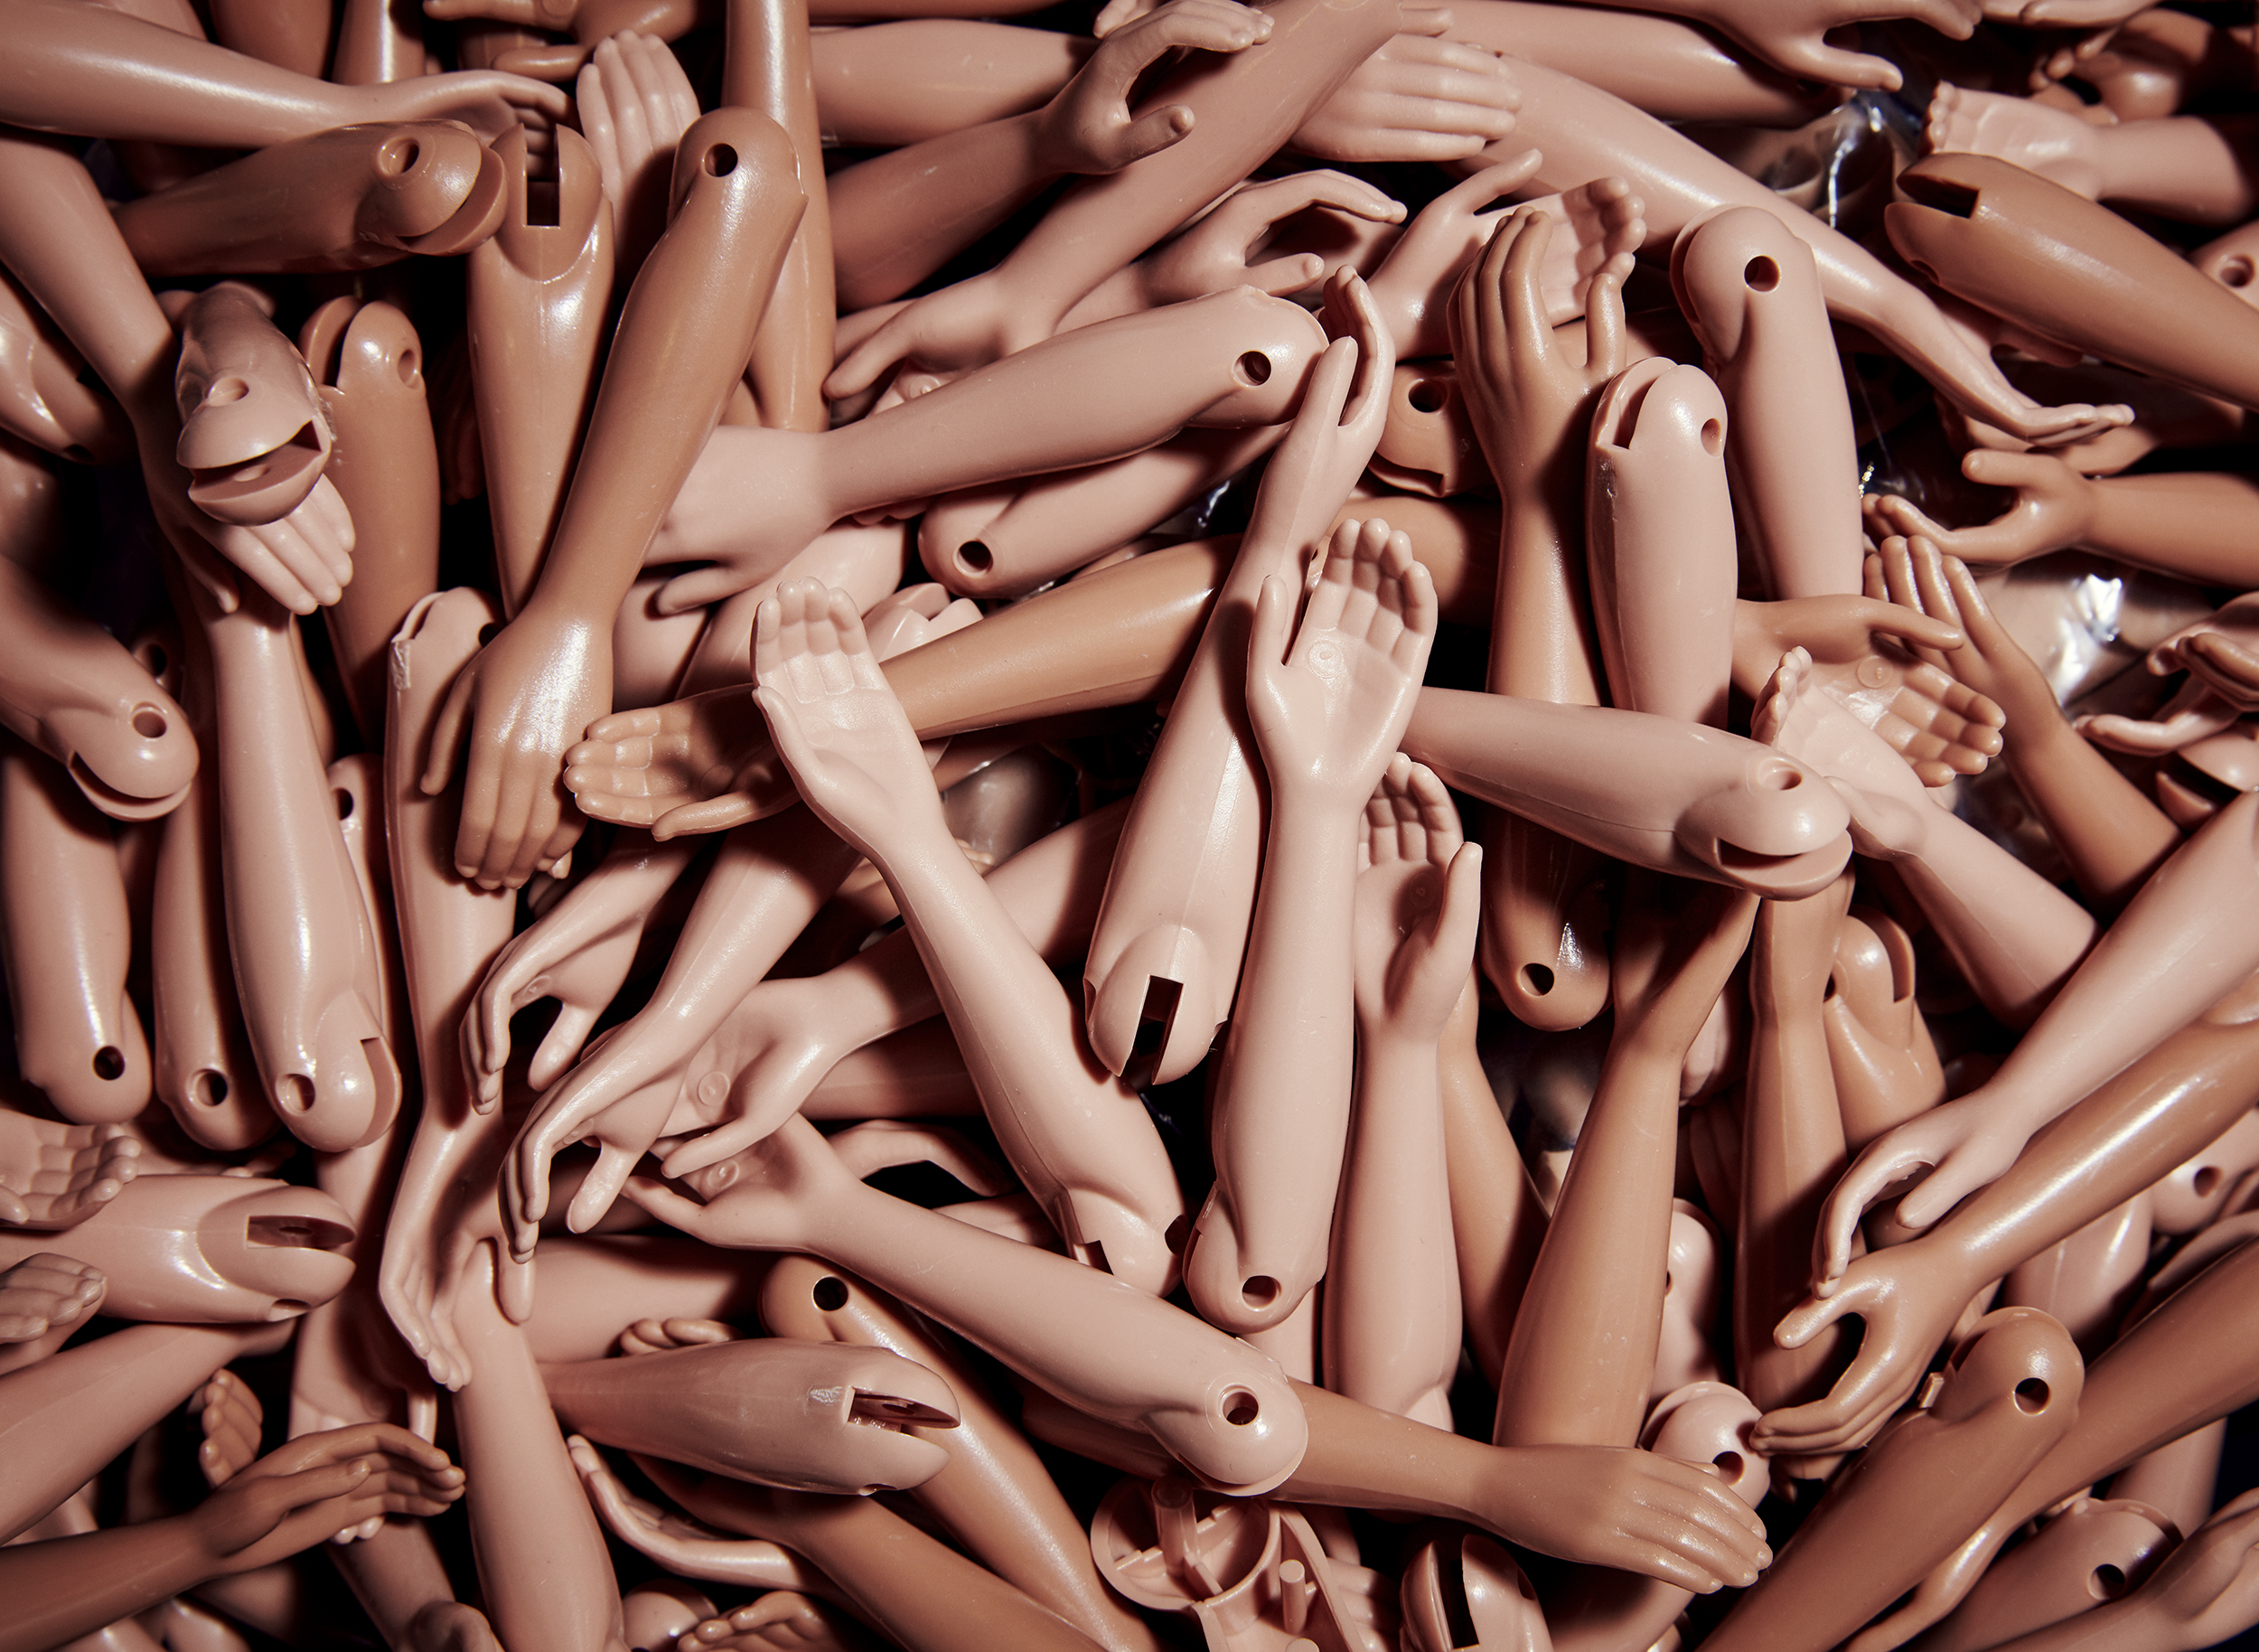 Barbie's forearms all together in a container at Mattel's El Segundo, Calif. headquarters.